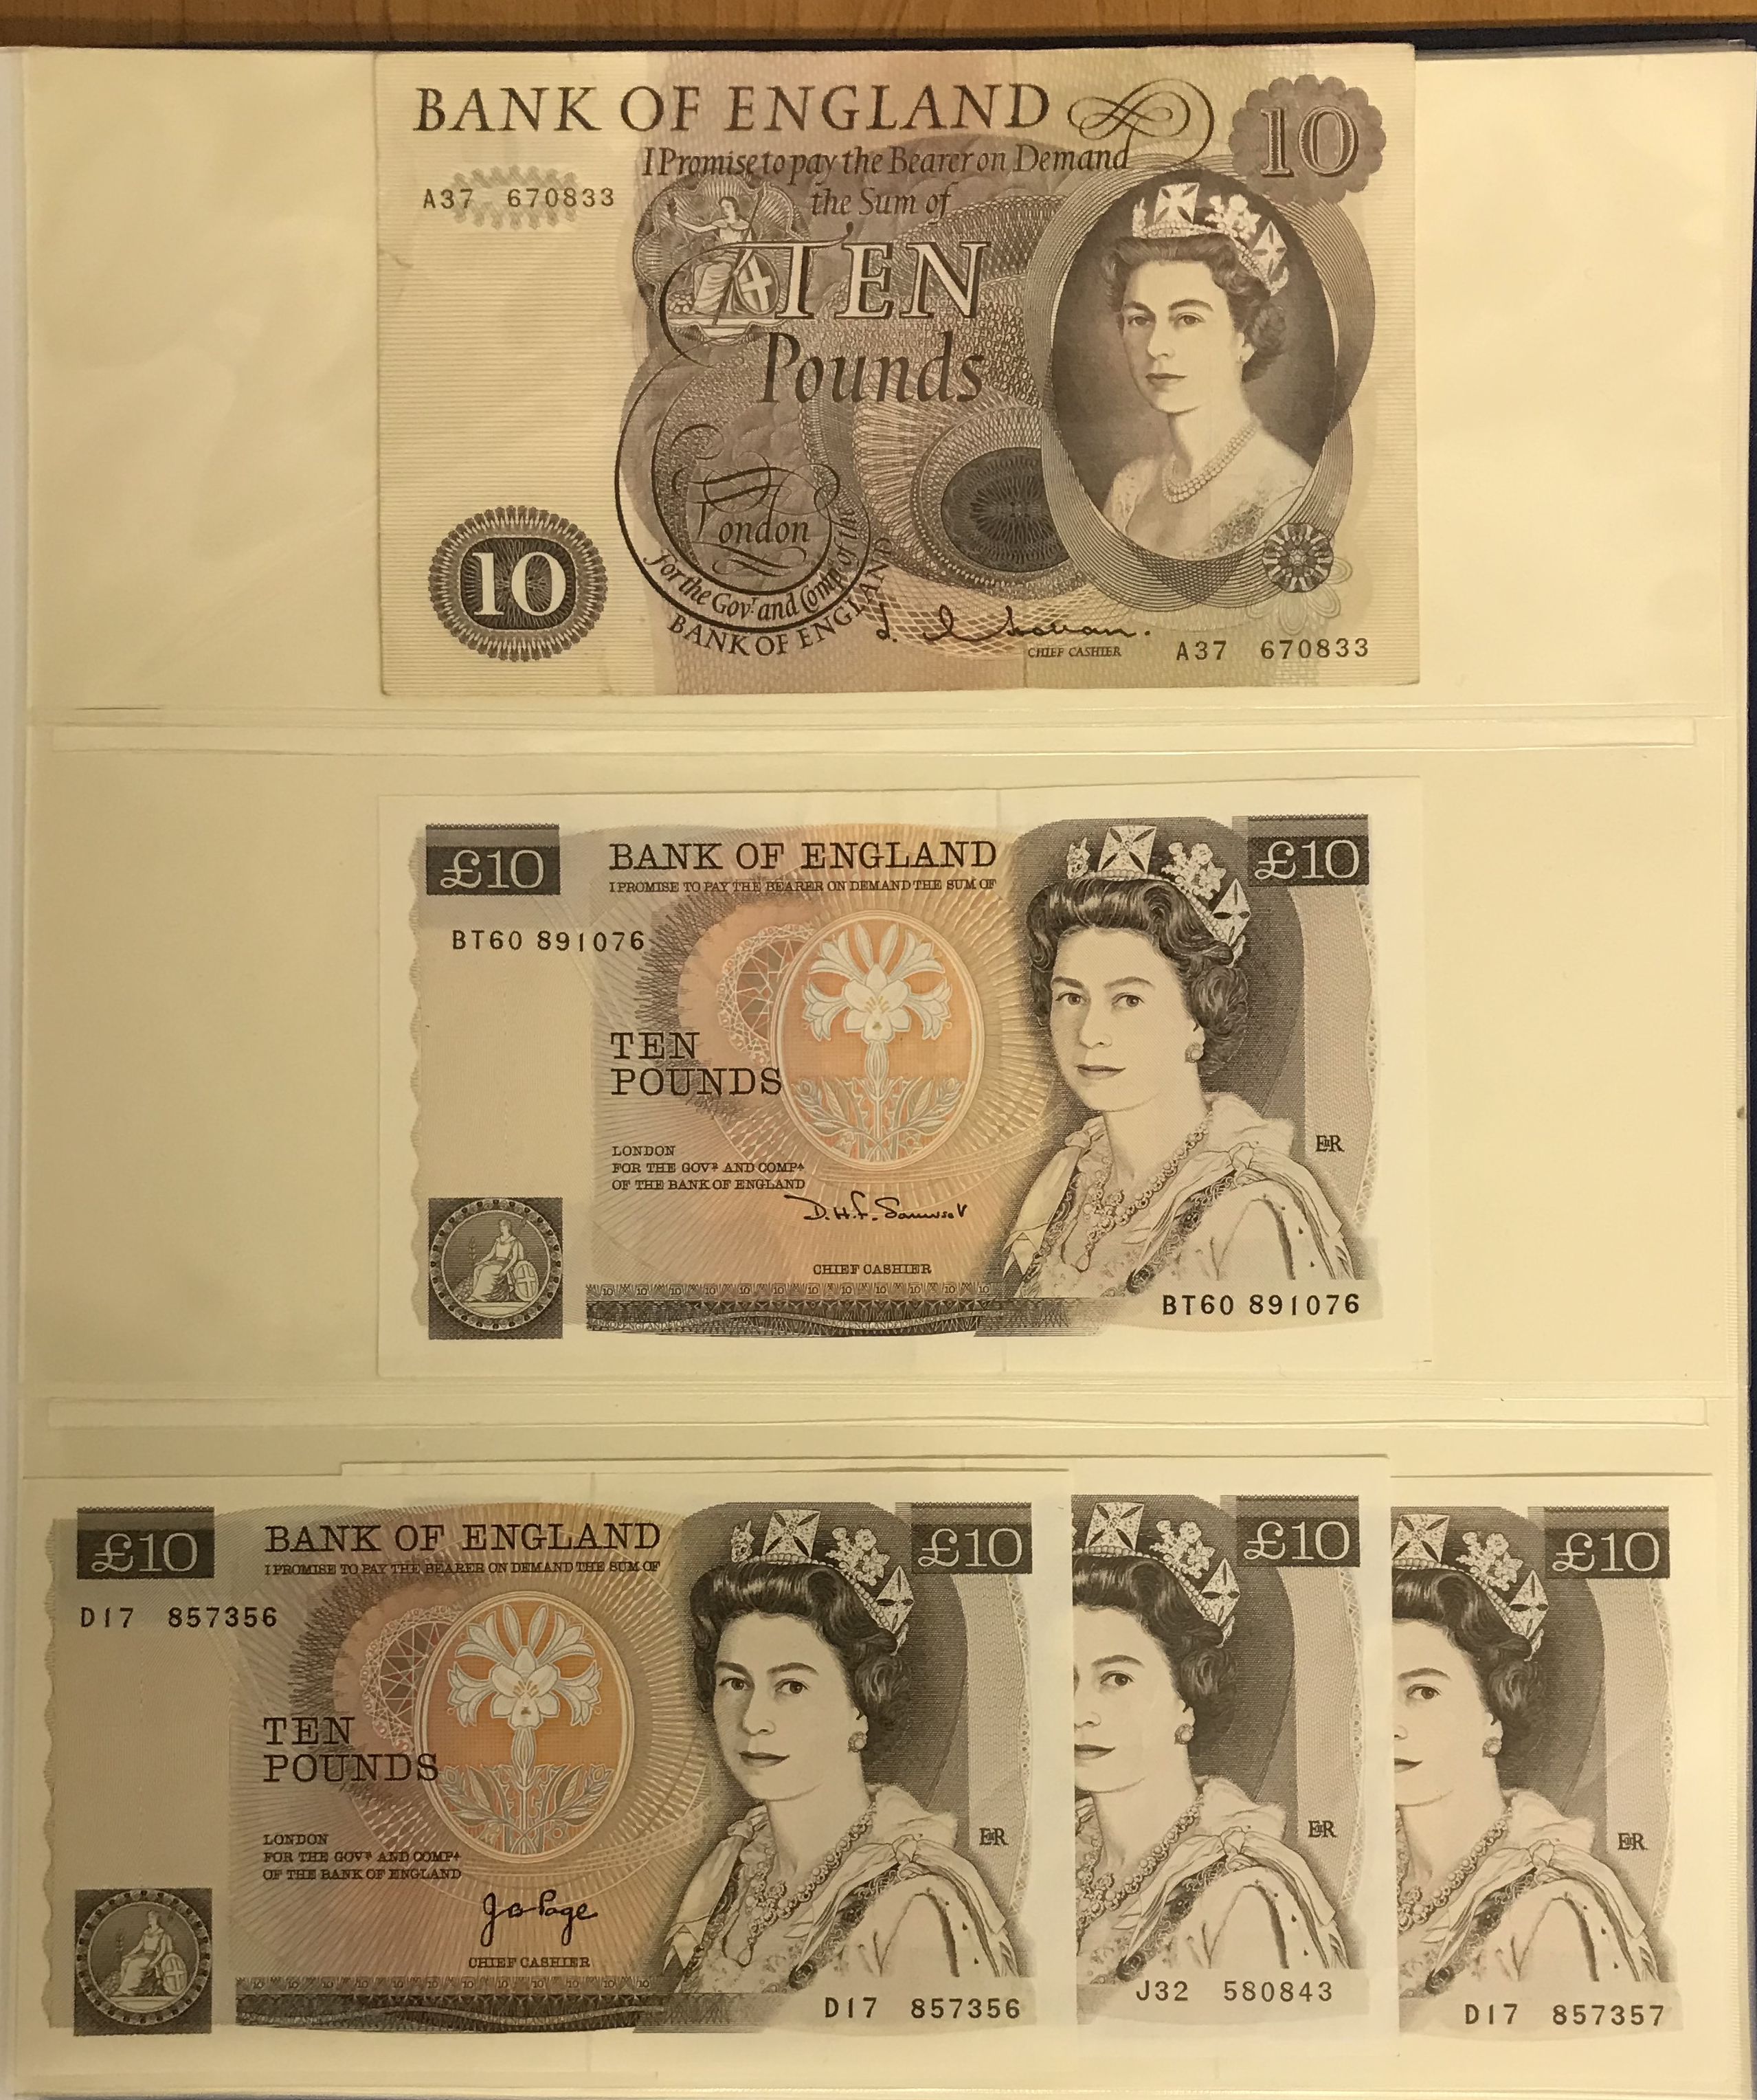 FIVE EARLY TEN POUNDS BANKNOTES